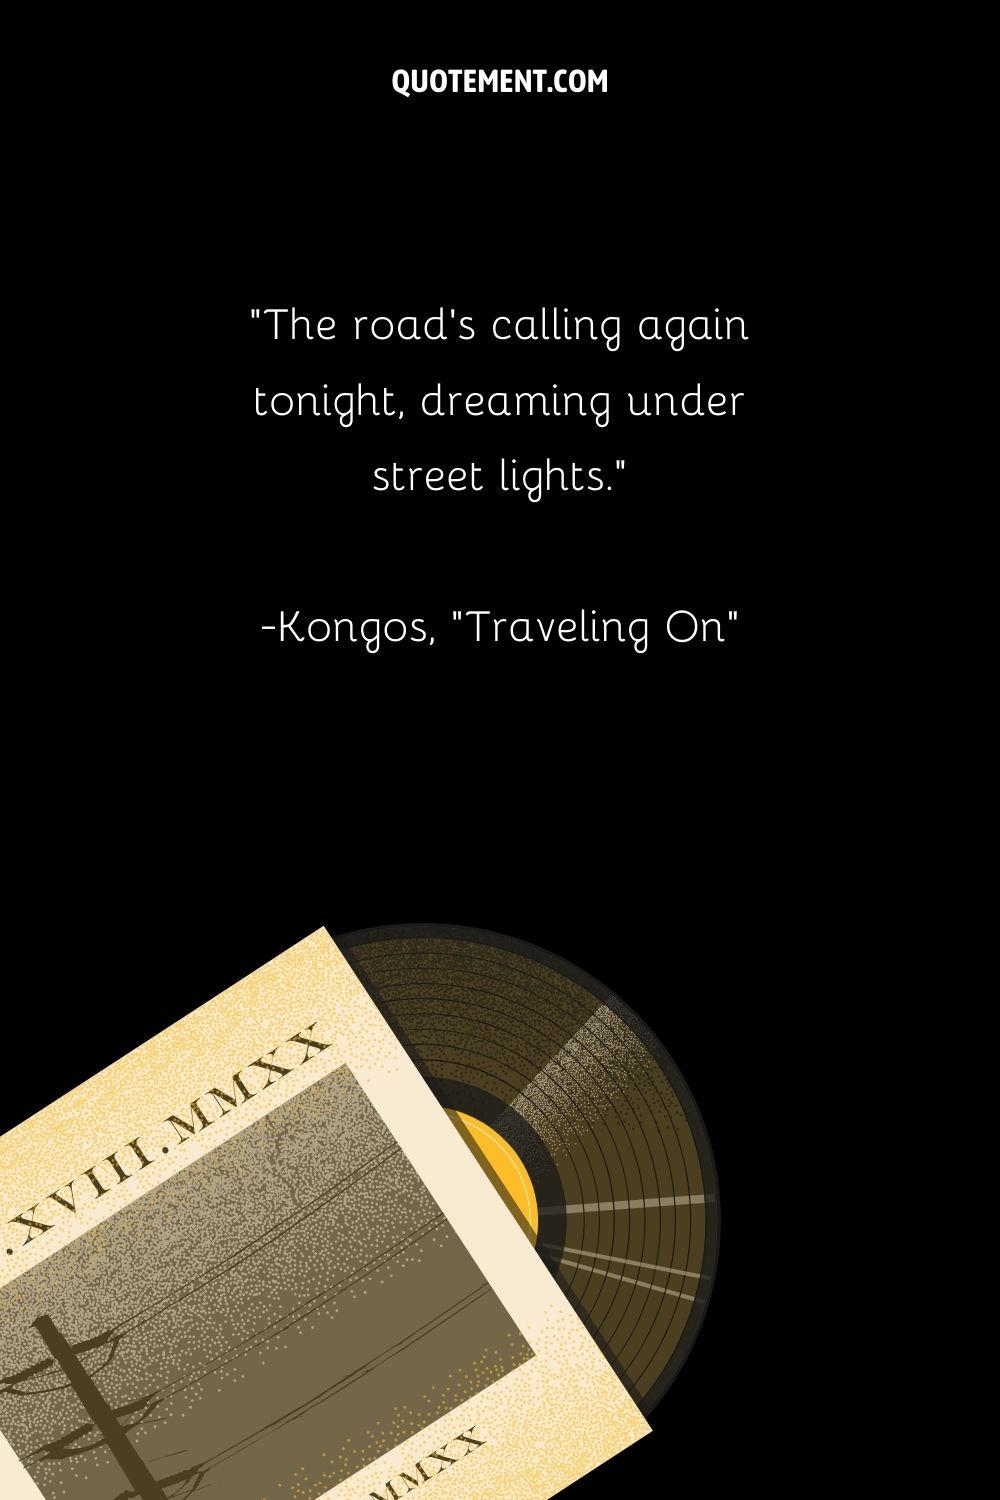 “The road’s calling again tonight, dreaming under street lights.” — Kongos, “Traveling On”